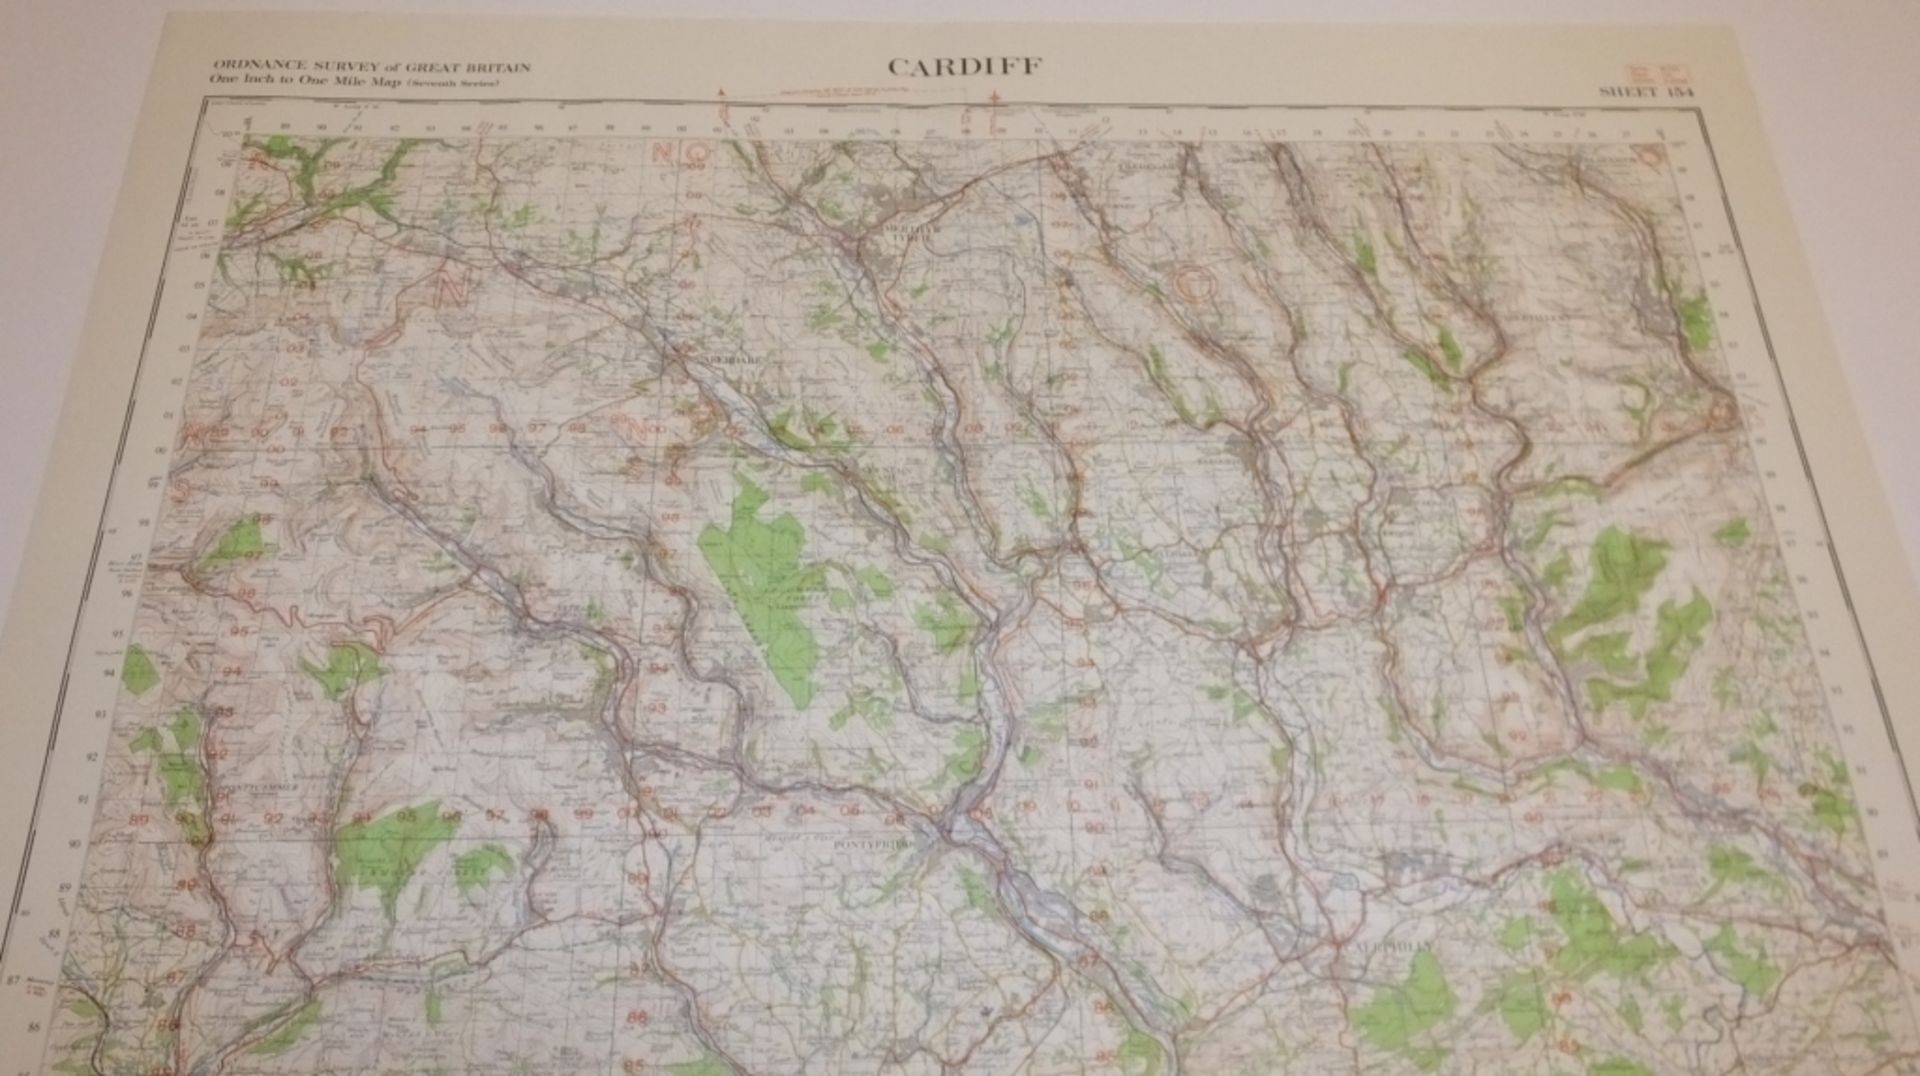 23x ENGLAND & WALES MAP CARDIFF 1INCH 1MILE 1961 7TH SERIES 3GSGS SHEET 154 - Image 3 of 5